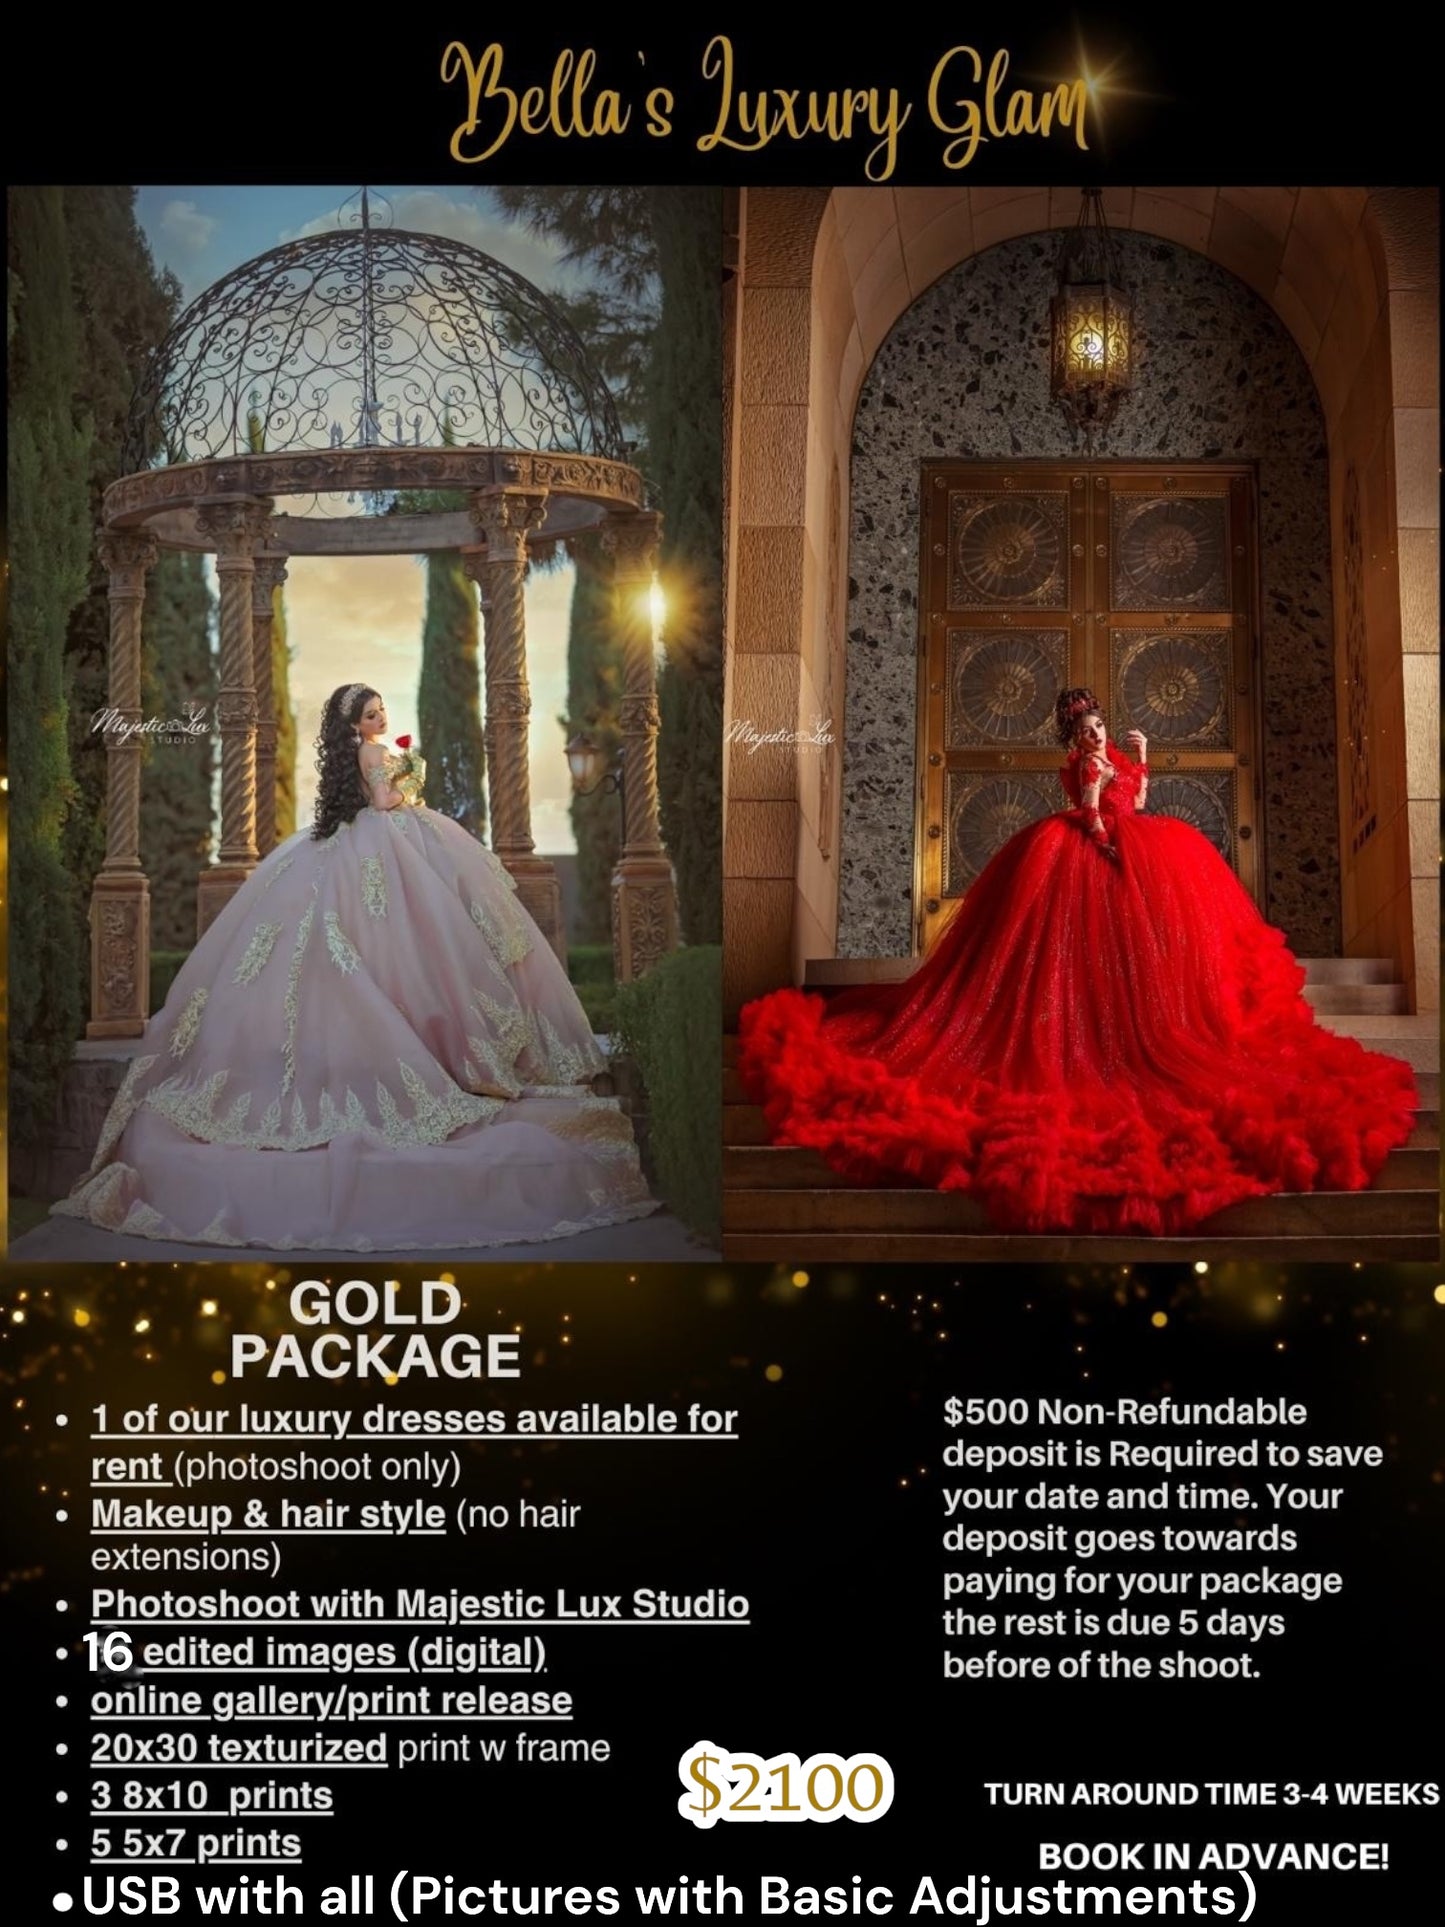 This package includes a Frame 🖼️ & USB (with all photoshoot pictures with BASIC ADJUSTMENTS) Special package DRESS RENTAL PACKAGE , INCLUDES (MAKEUP & HAIR , 16 PROFESSIONAL PICTURES & 1 RENTAL DRESS OF CHOICE by text only 2️⃣1️⃣4️⃣5️⃣3️⃣8️⃣4️⃣3️⃣3️⃣5️⃣